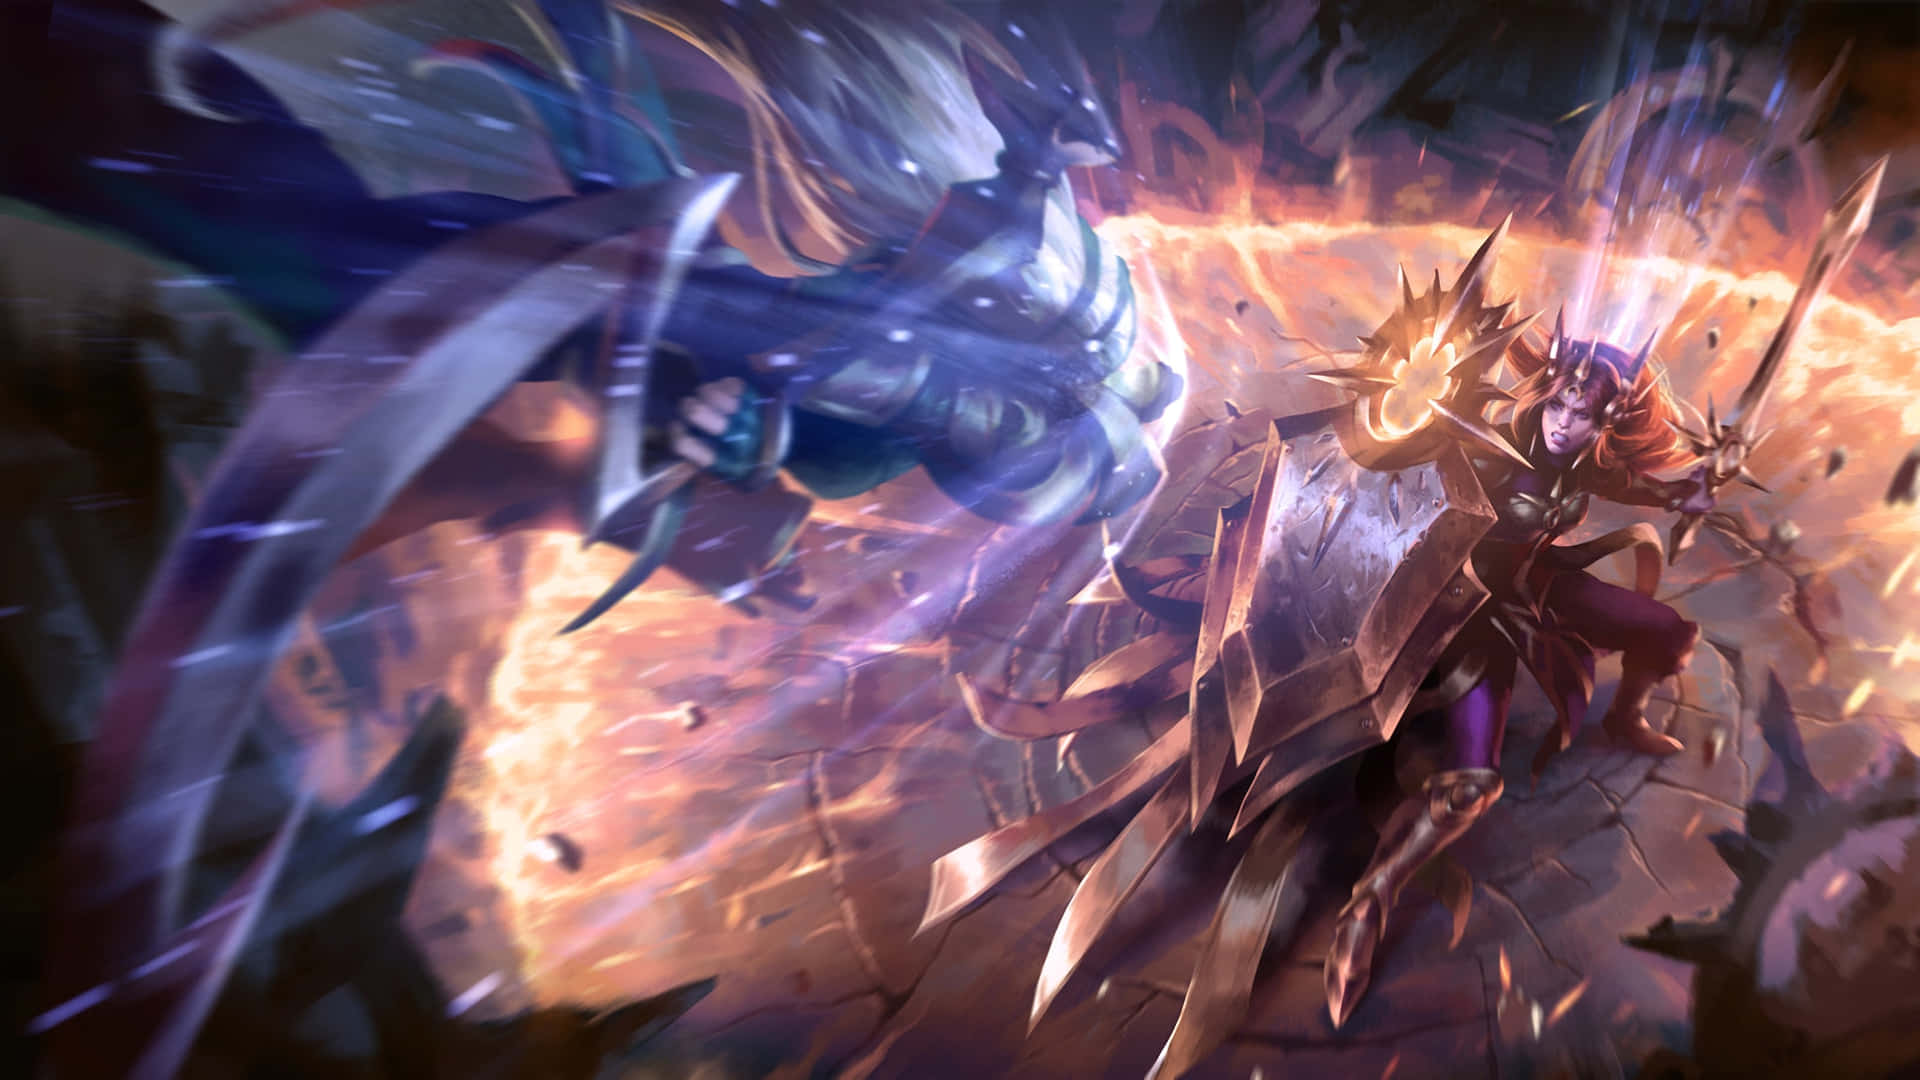 Up your skills with a laptop designed to play League of Legends Wallpaper